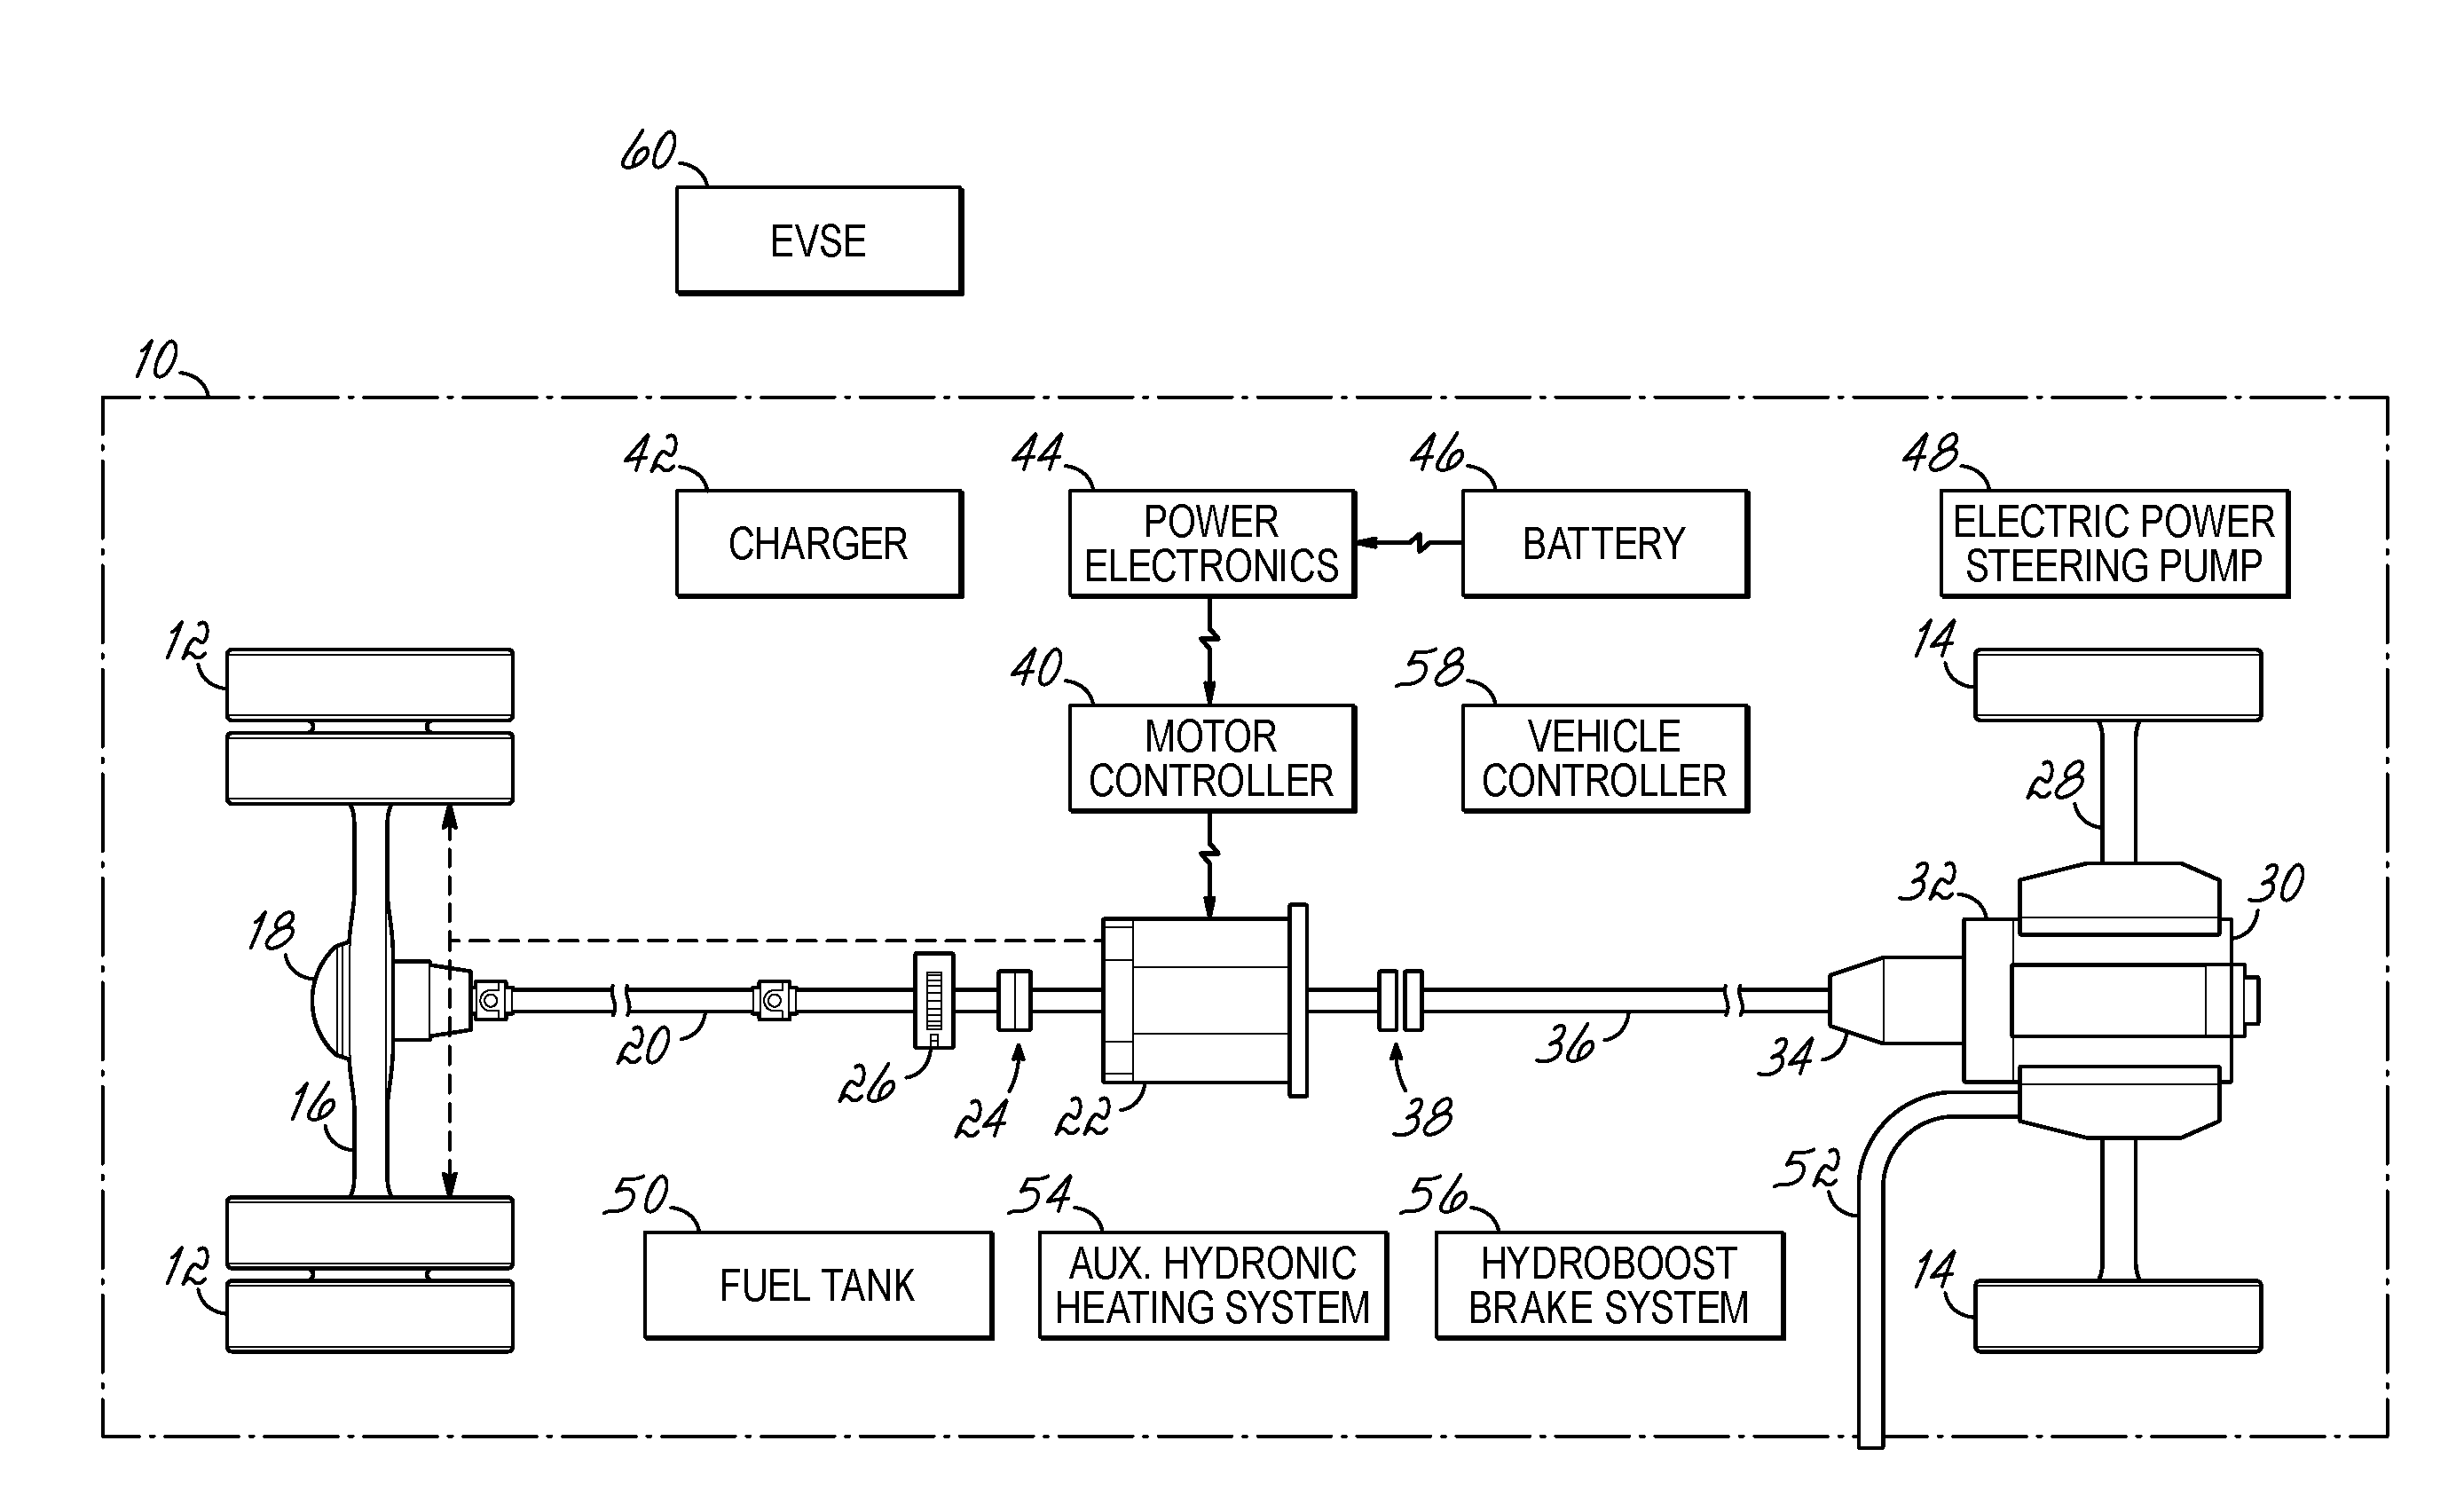 Onboard generator drive system for electric vehicles